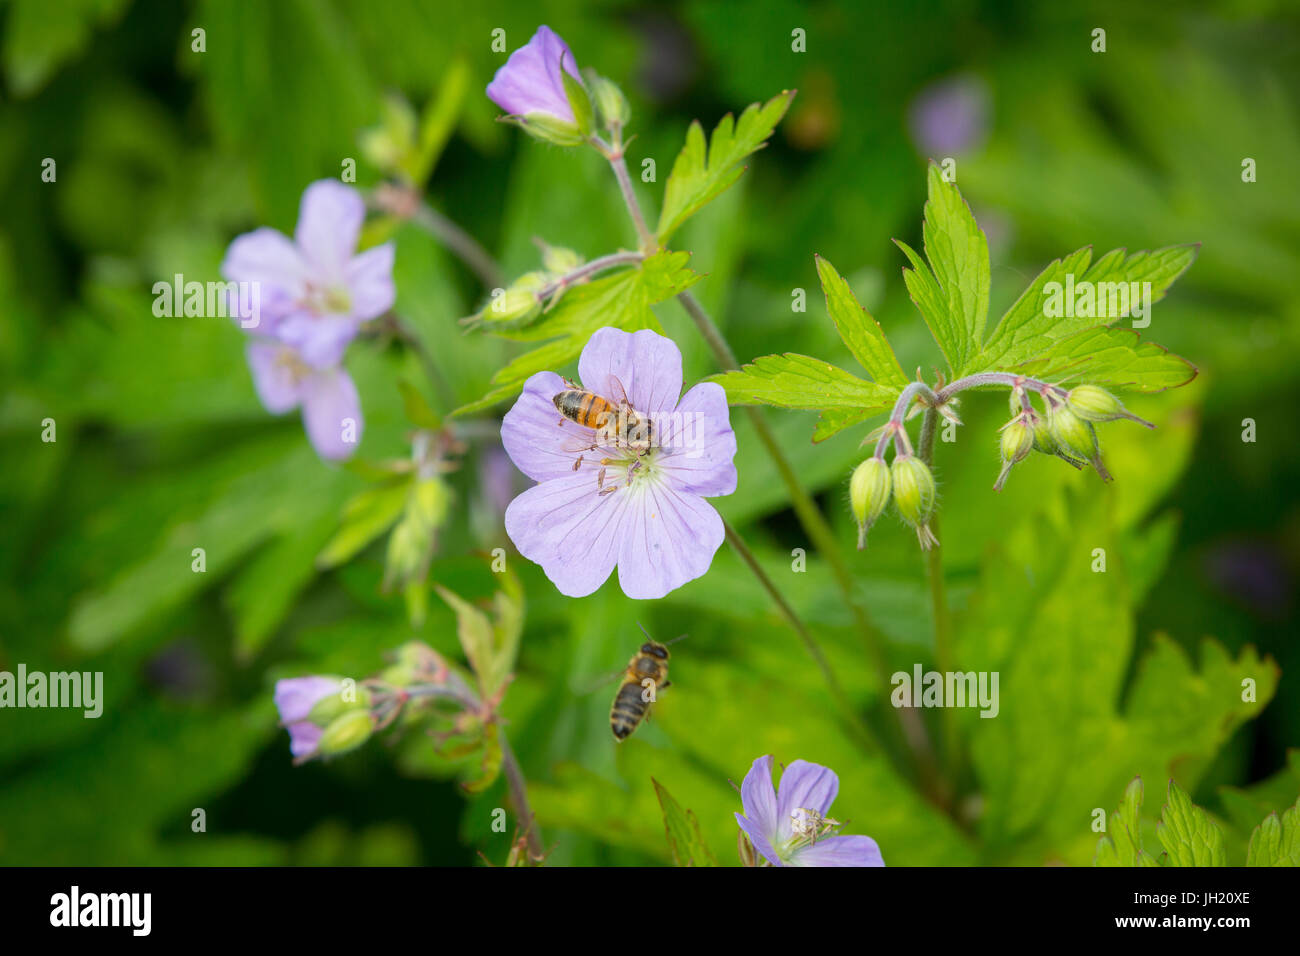 Honey Bee on a flowering Wild geranium, spotted geranium or wood geranium - Geranium maculatum. Stock Photo